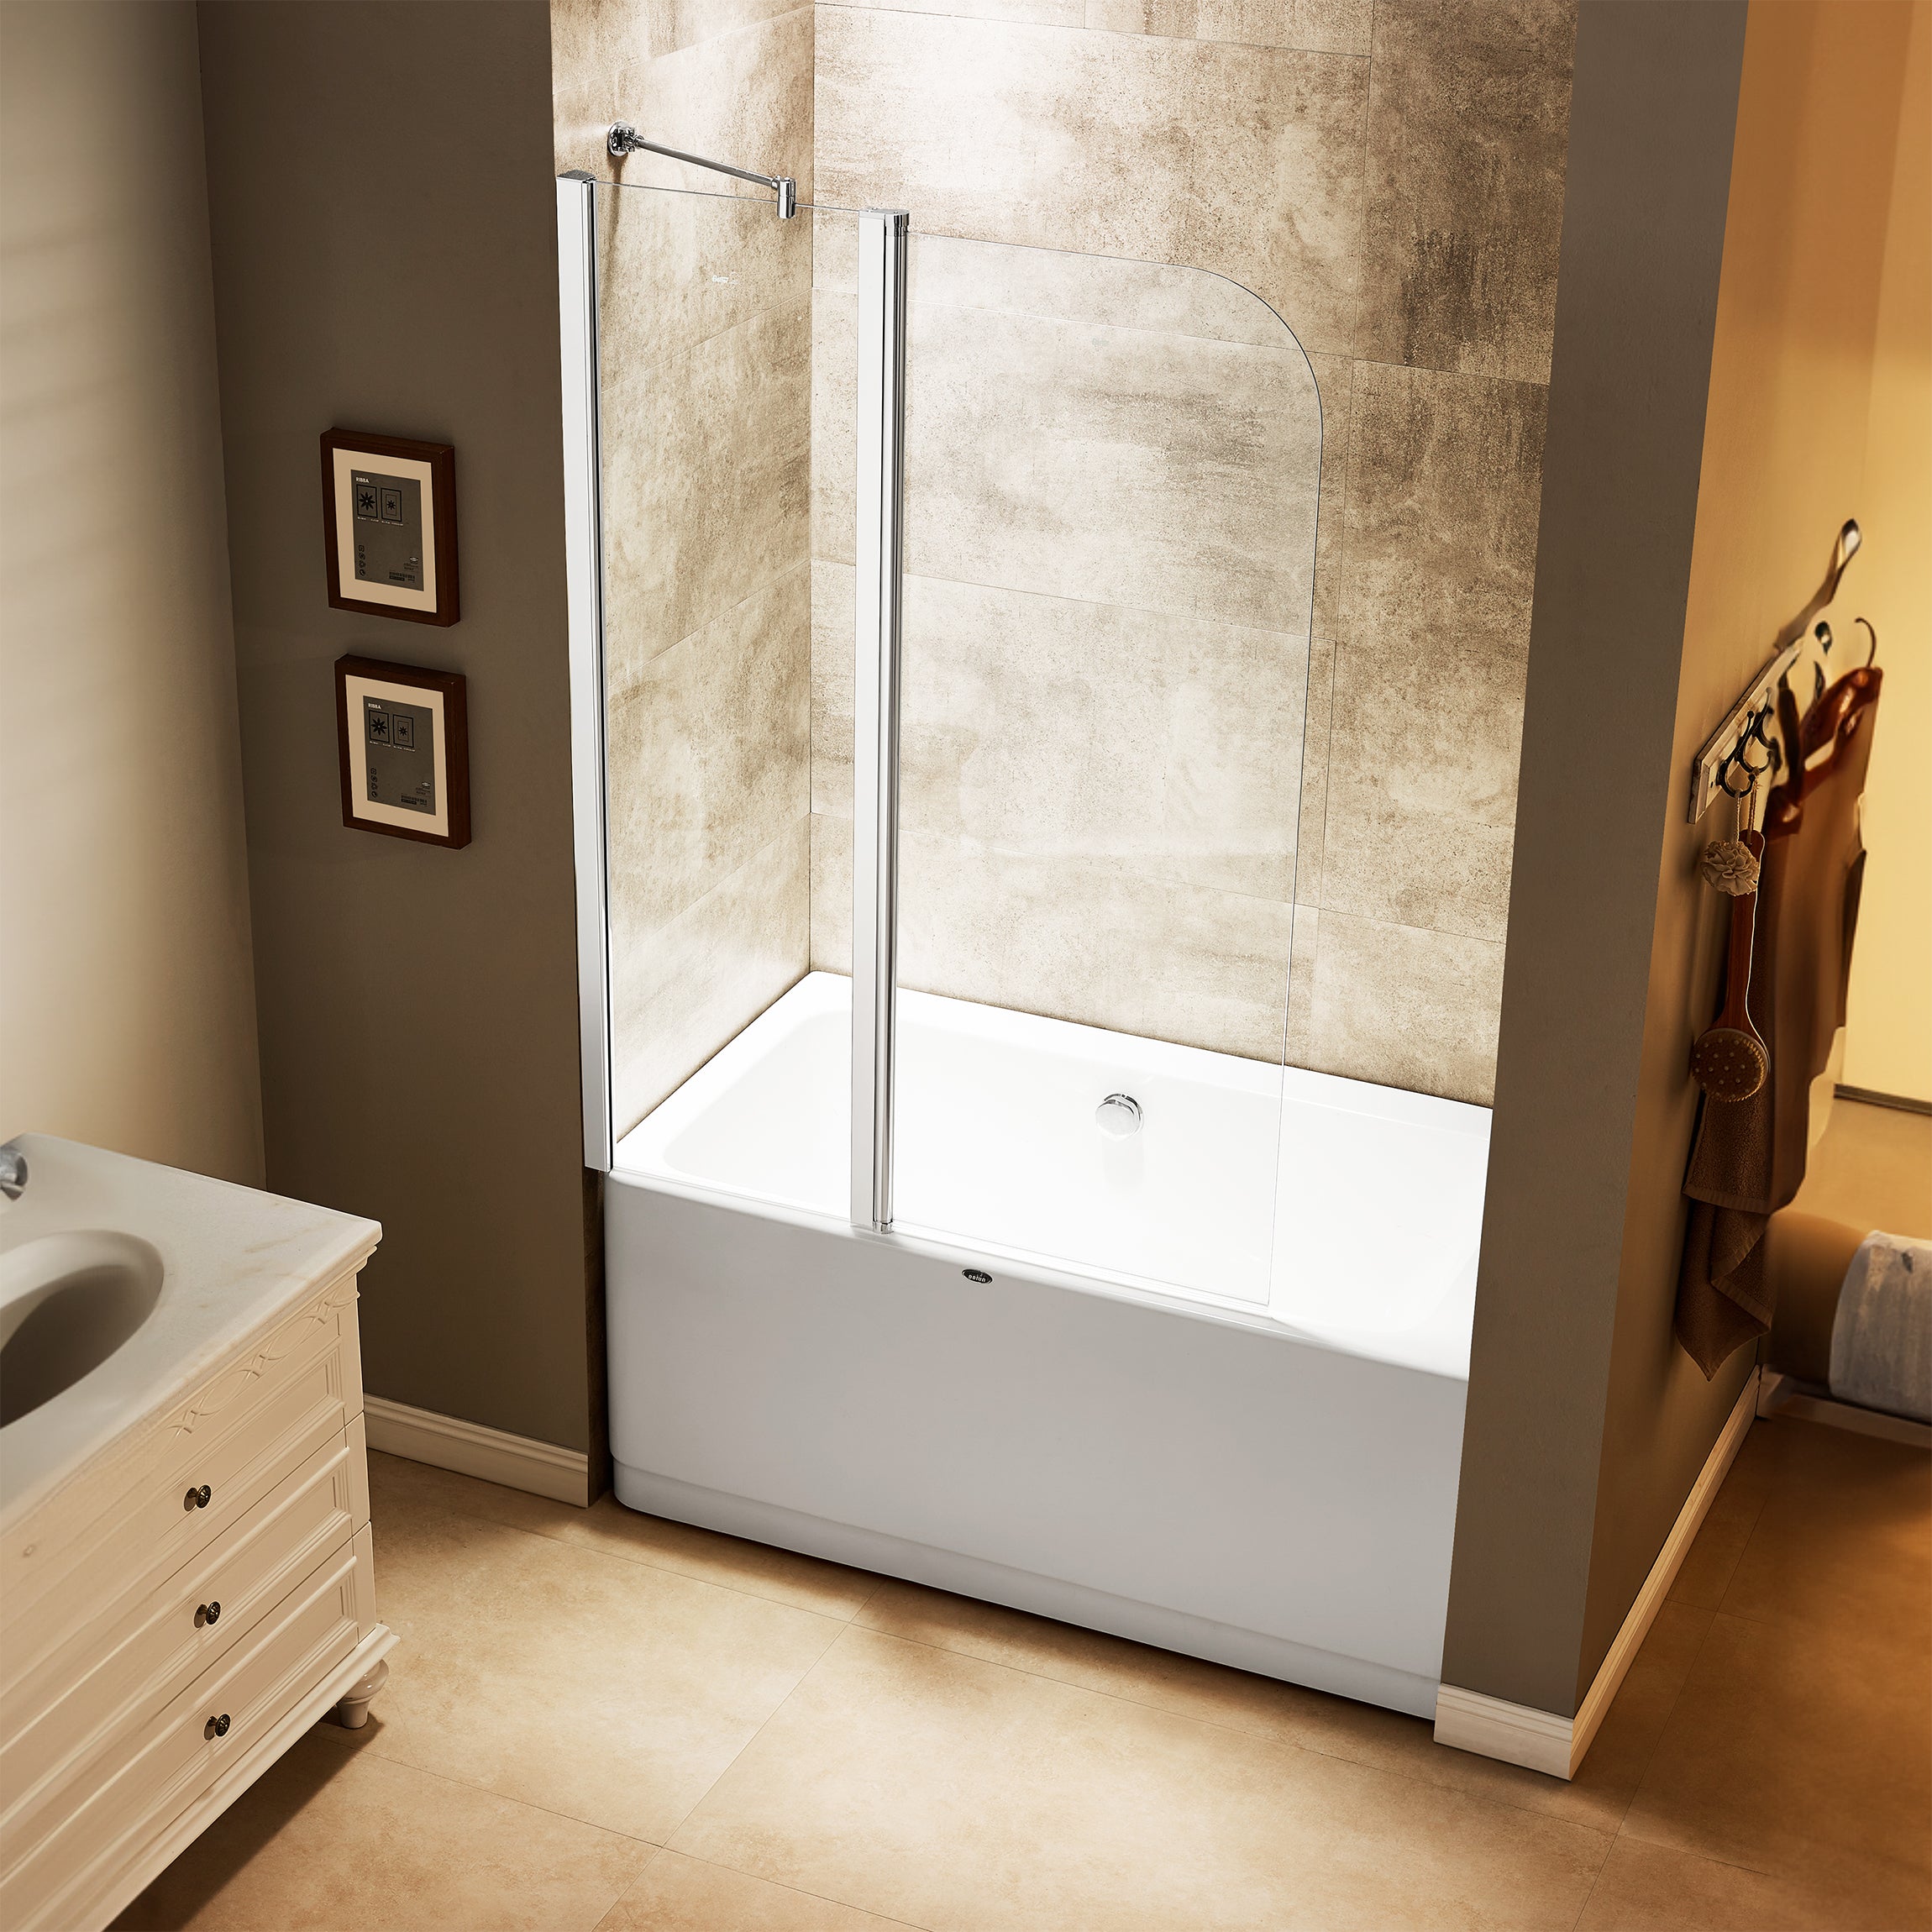 Dreamwerks 43"W x 59"H Frameless Pivot Tub Door in Chrome - Available in Clear or Frosted Glass - Dreamwerks